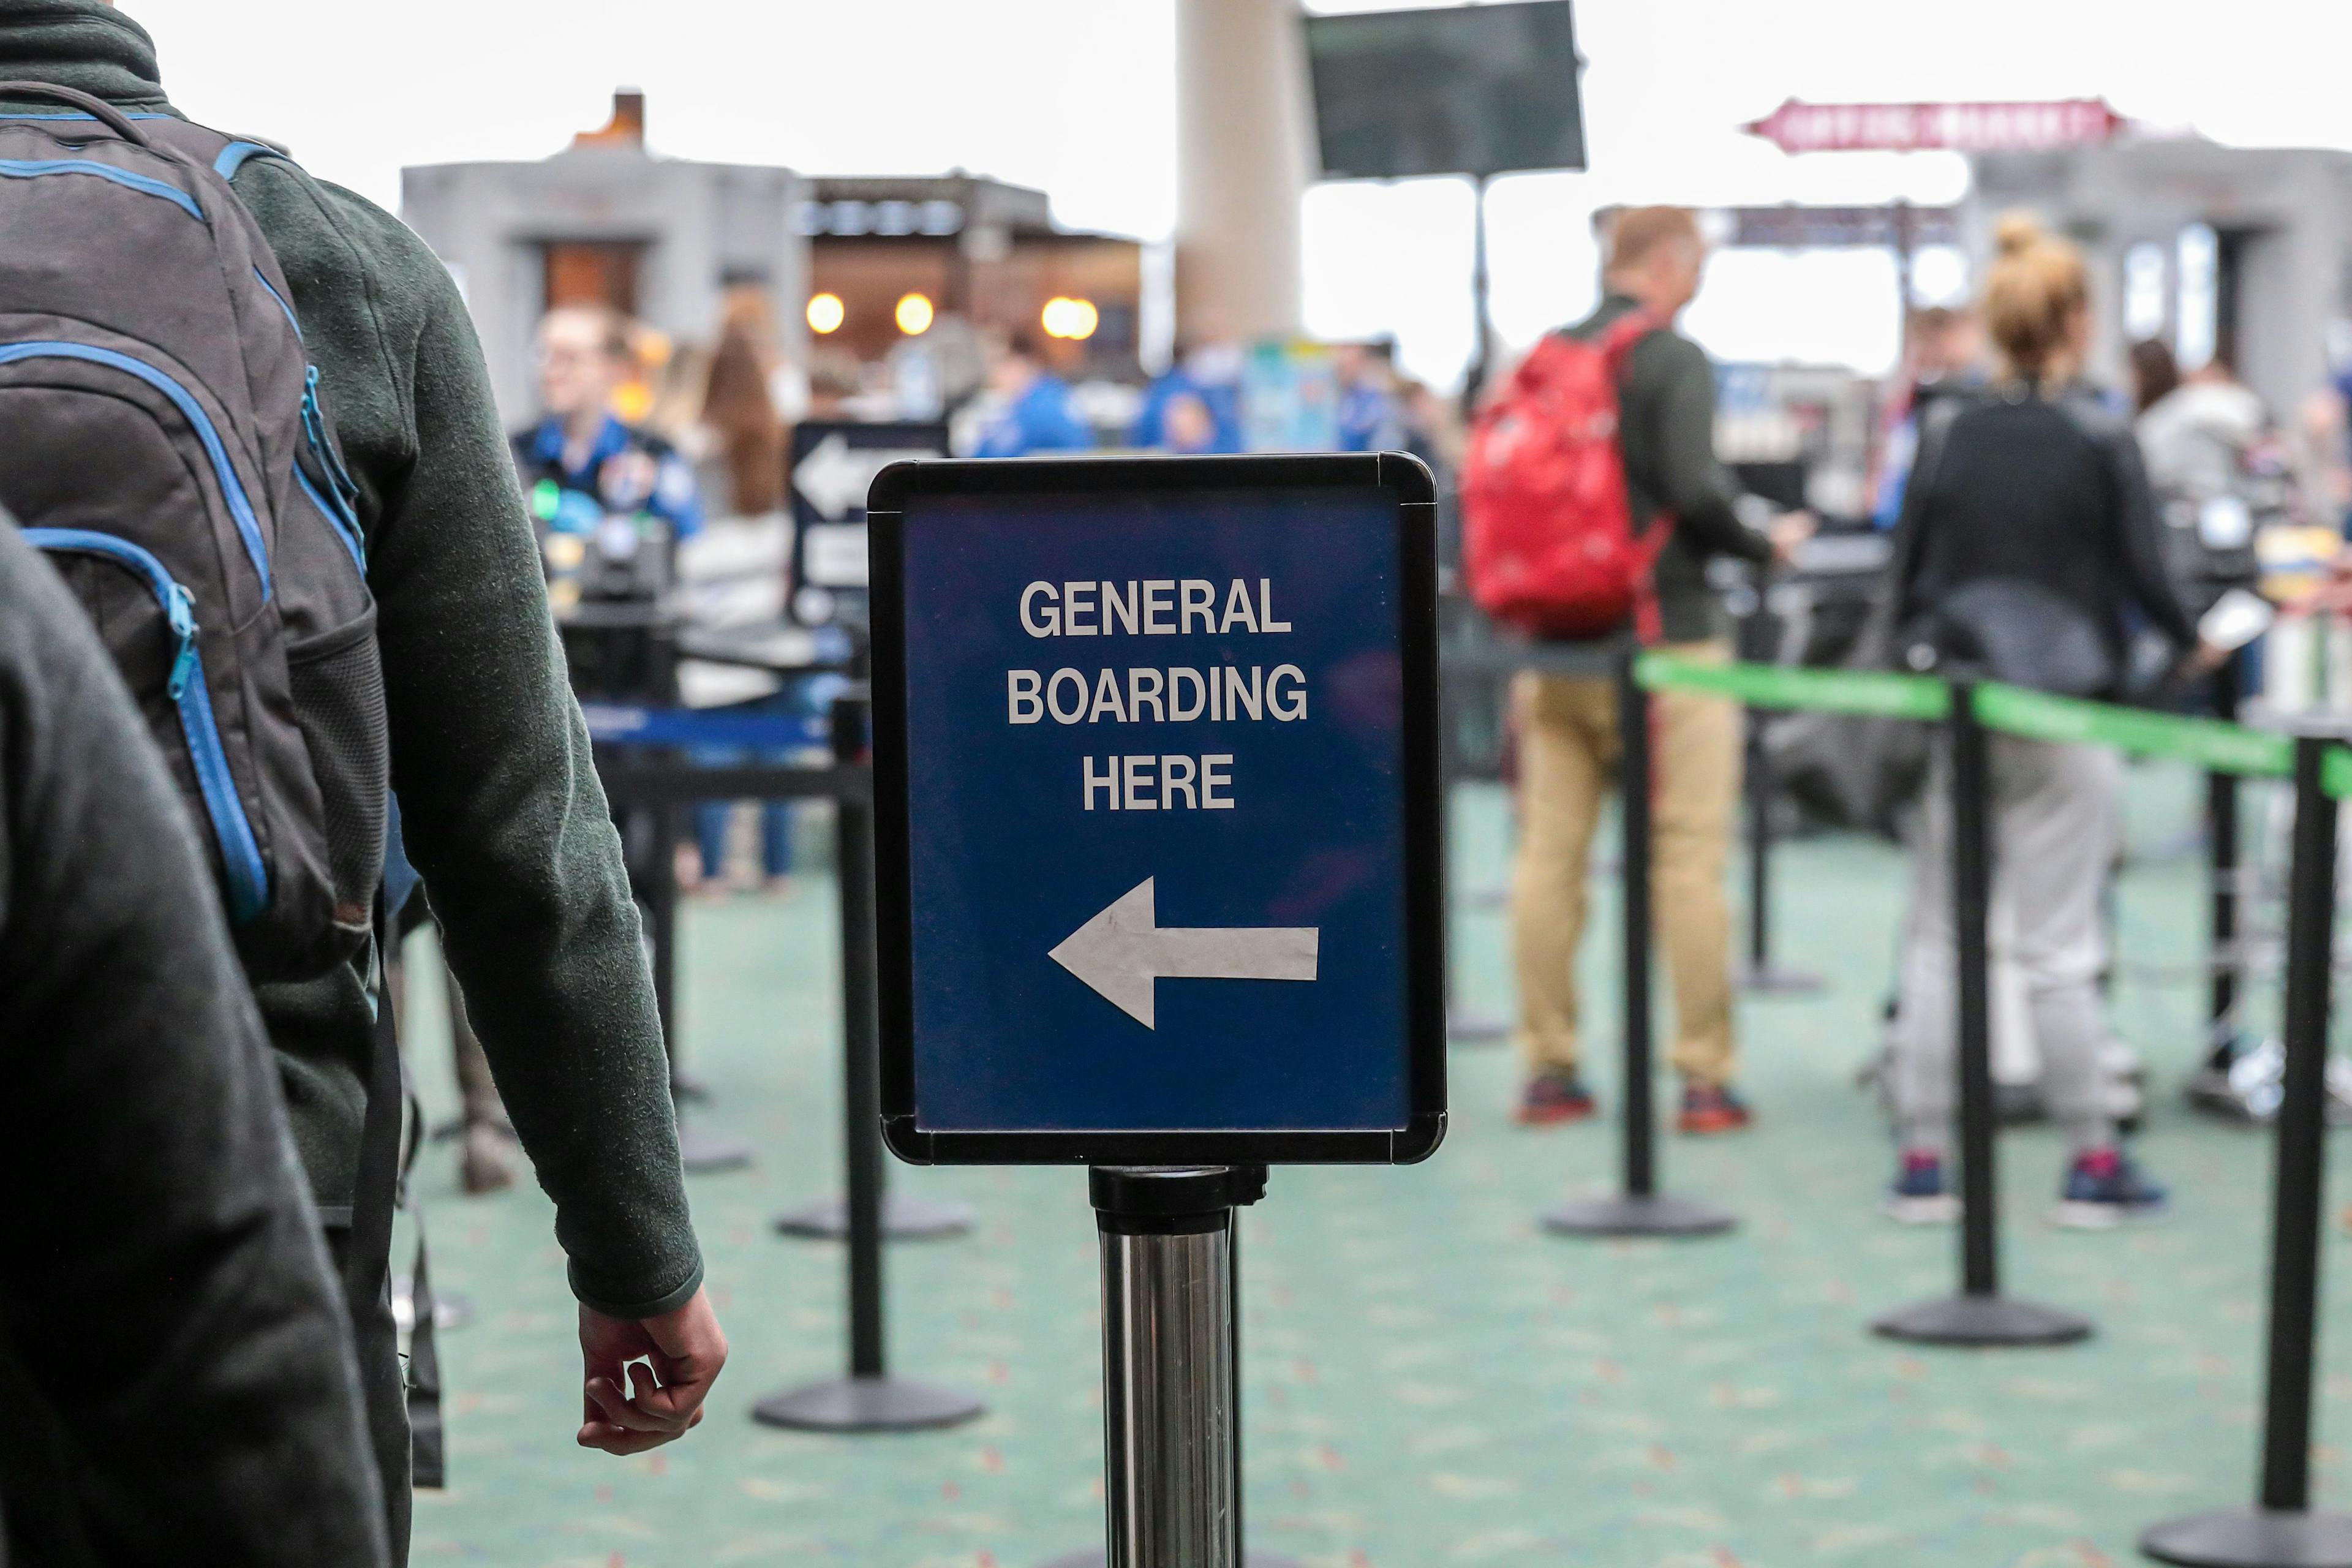 Posted sign in an airport read "General boarding here" to direct passenger for TSA security check | Image Credit: © Dmitry - stock.adobe.com